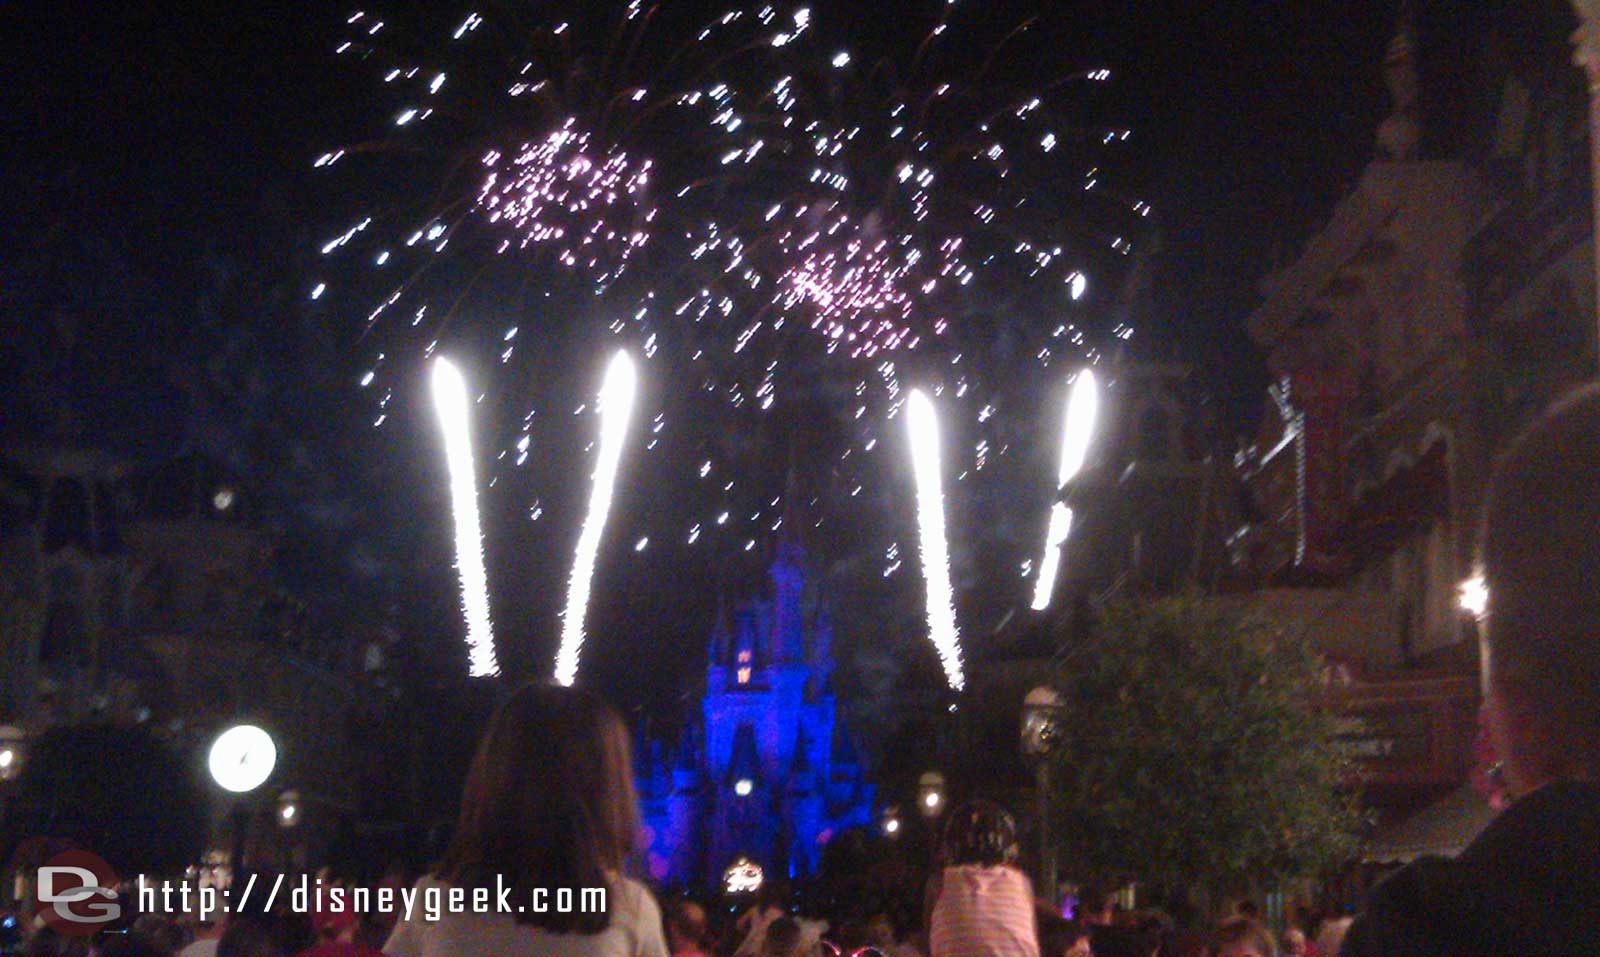 Closing out the evening with a partially obstructed view of Wishes